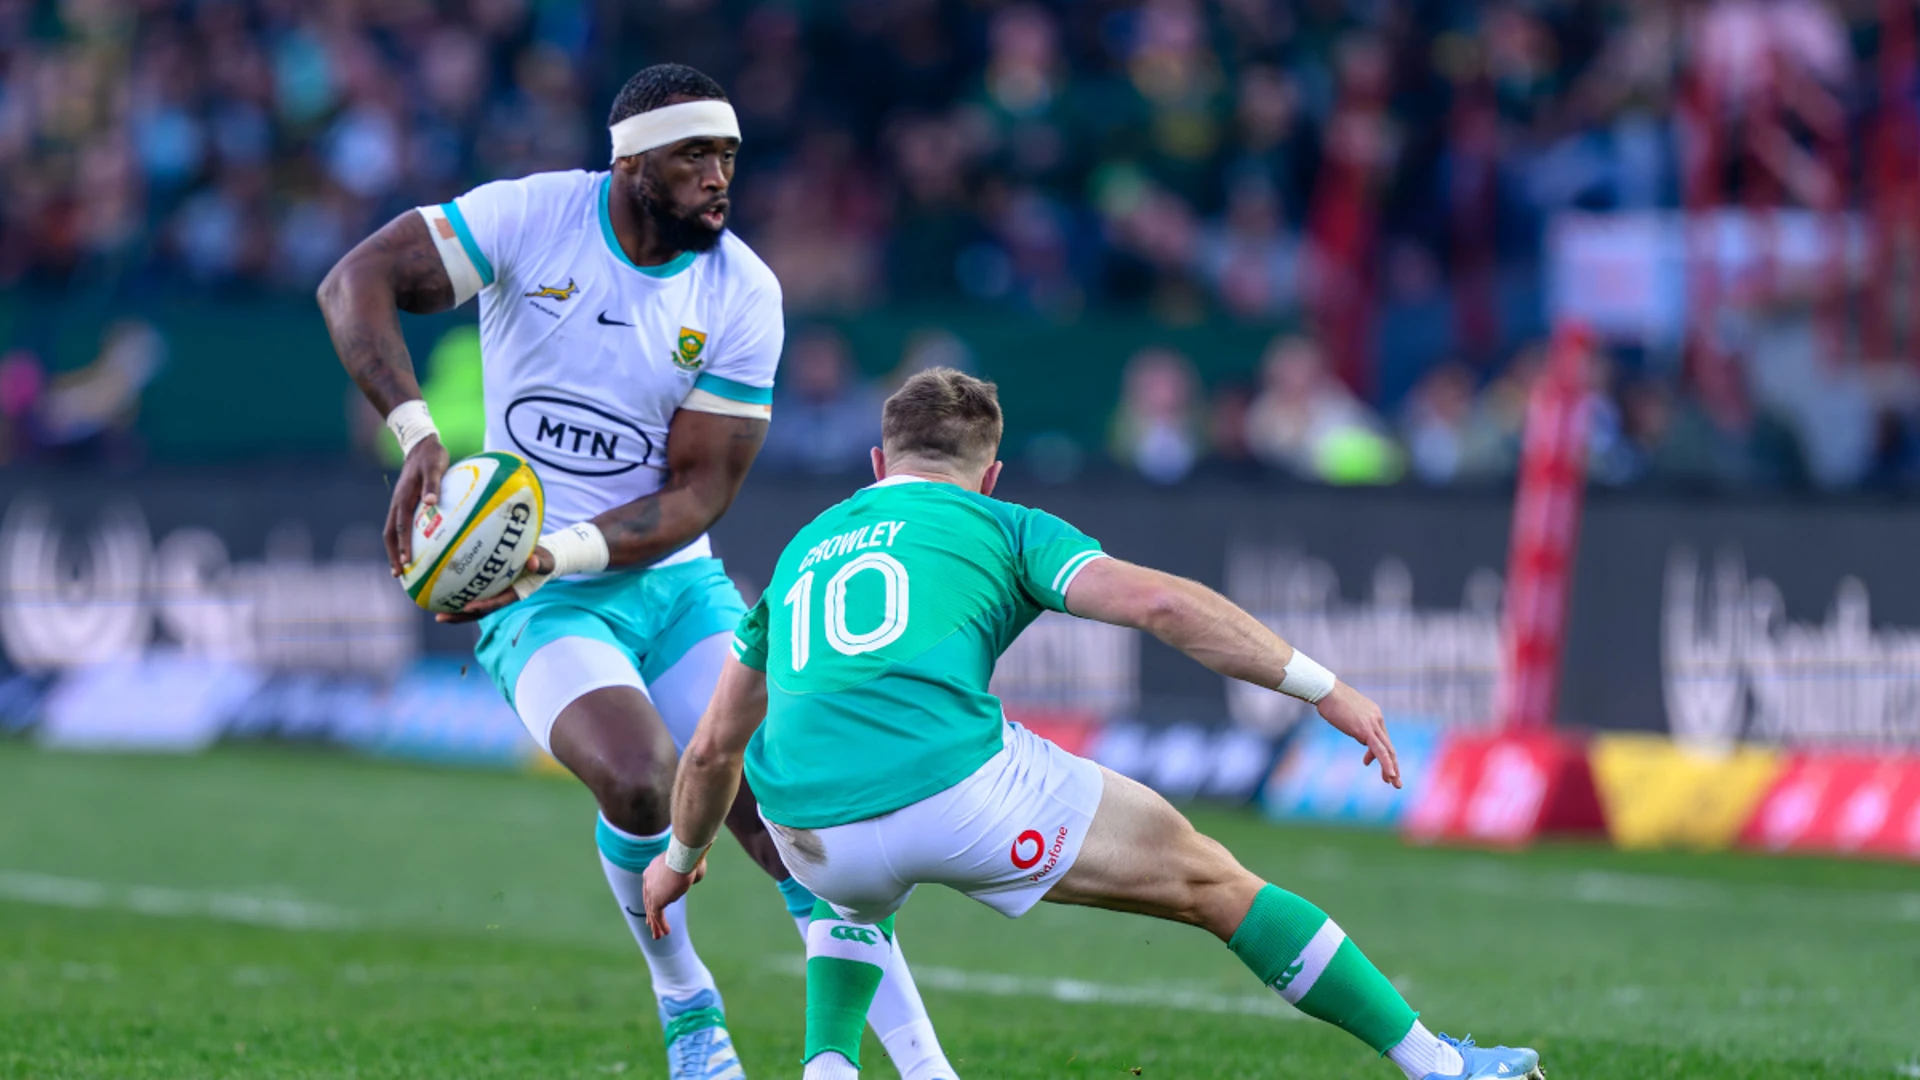 'Special' Springbok supporters drove us to victory, says Kolisi